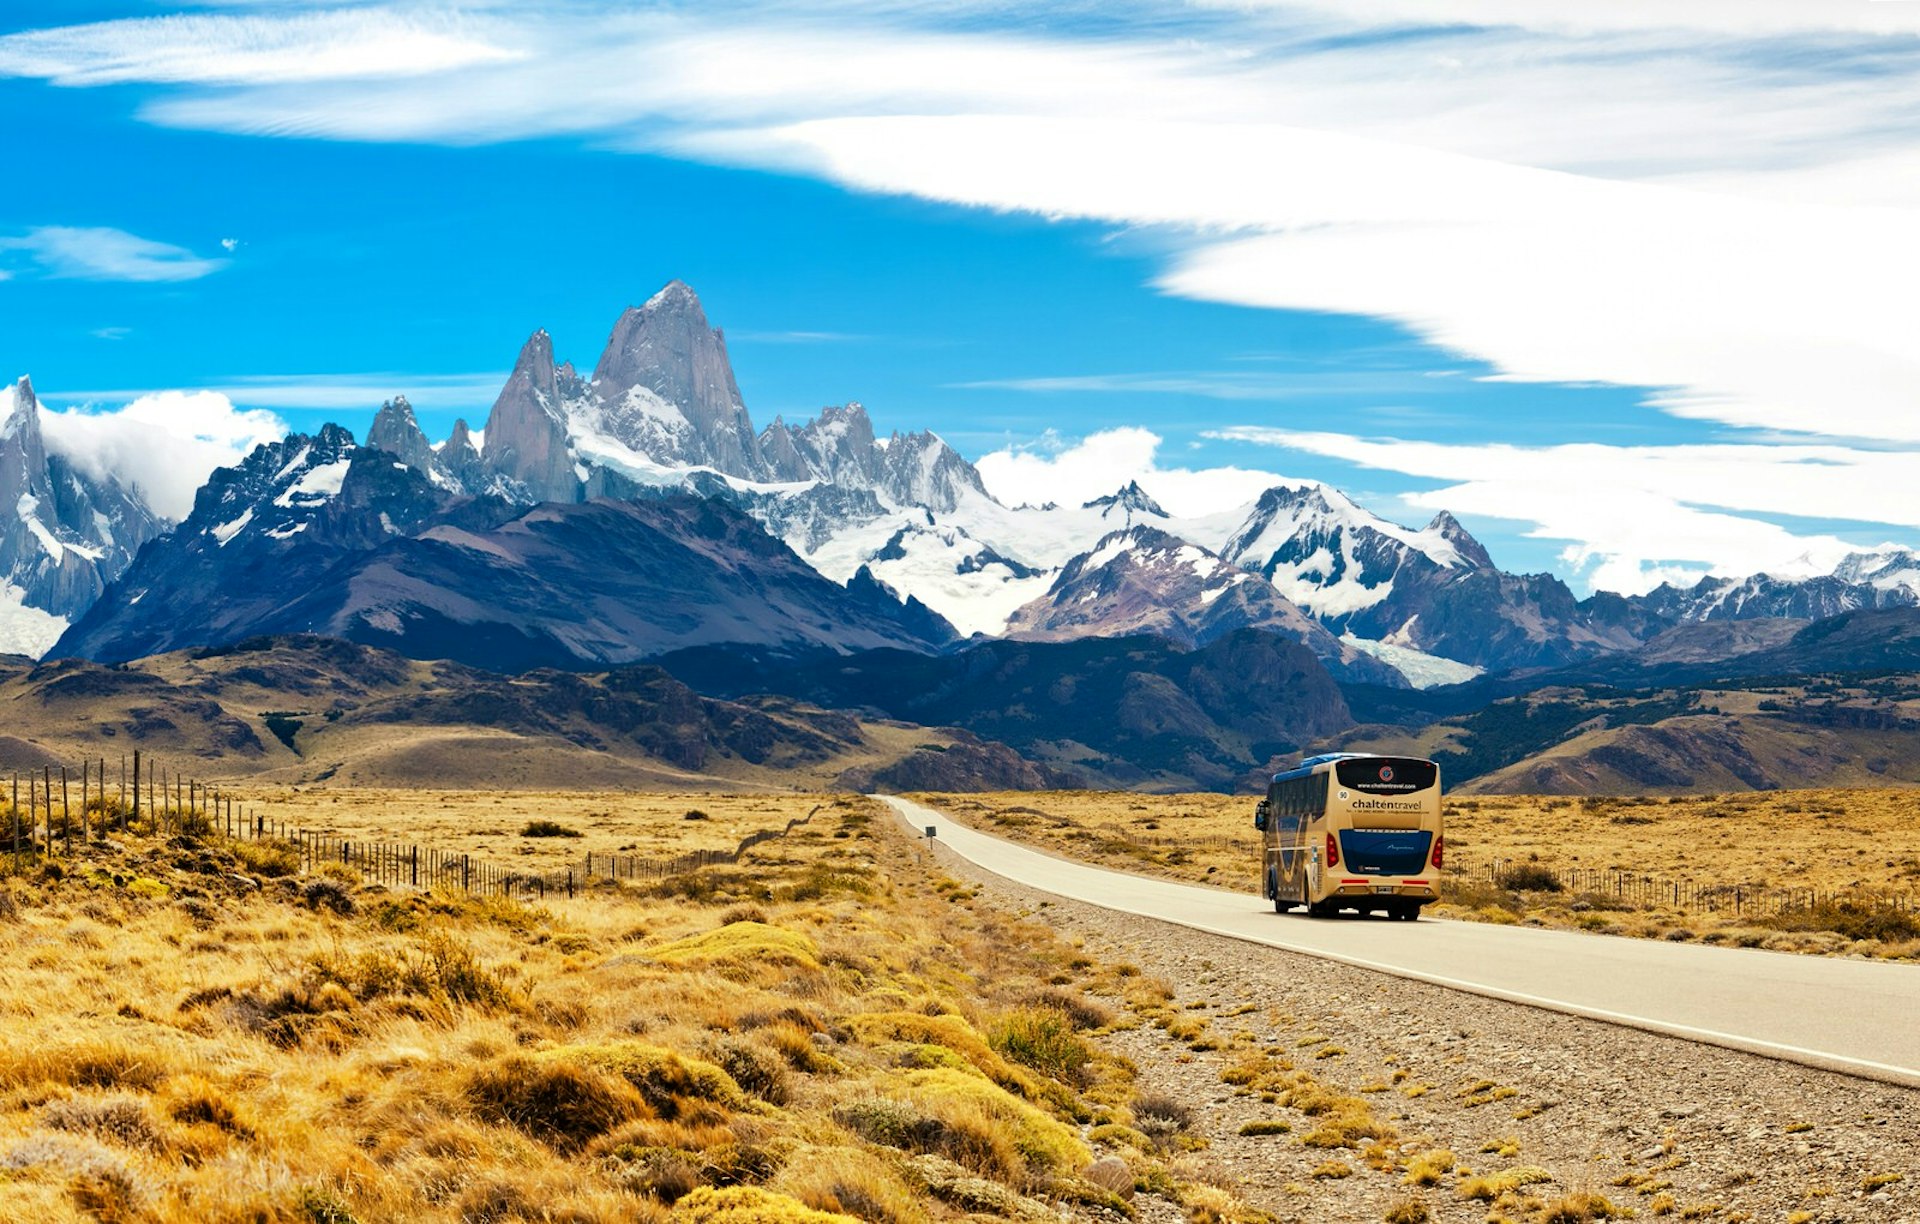 A bus travelling to El Chalten in Argentina, with the mountainous Patagonian Ice Field in the background